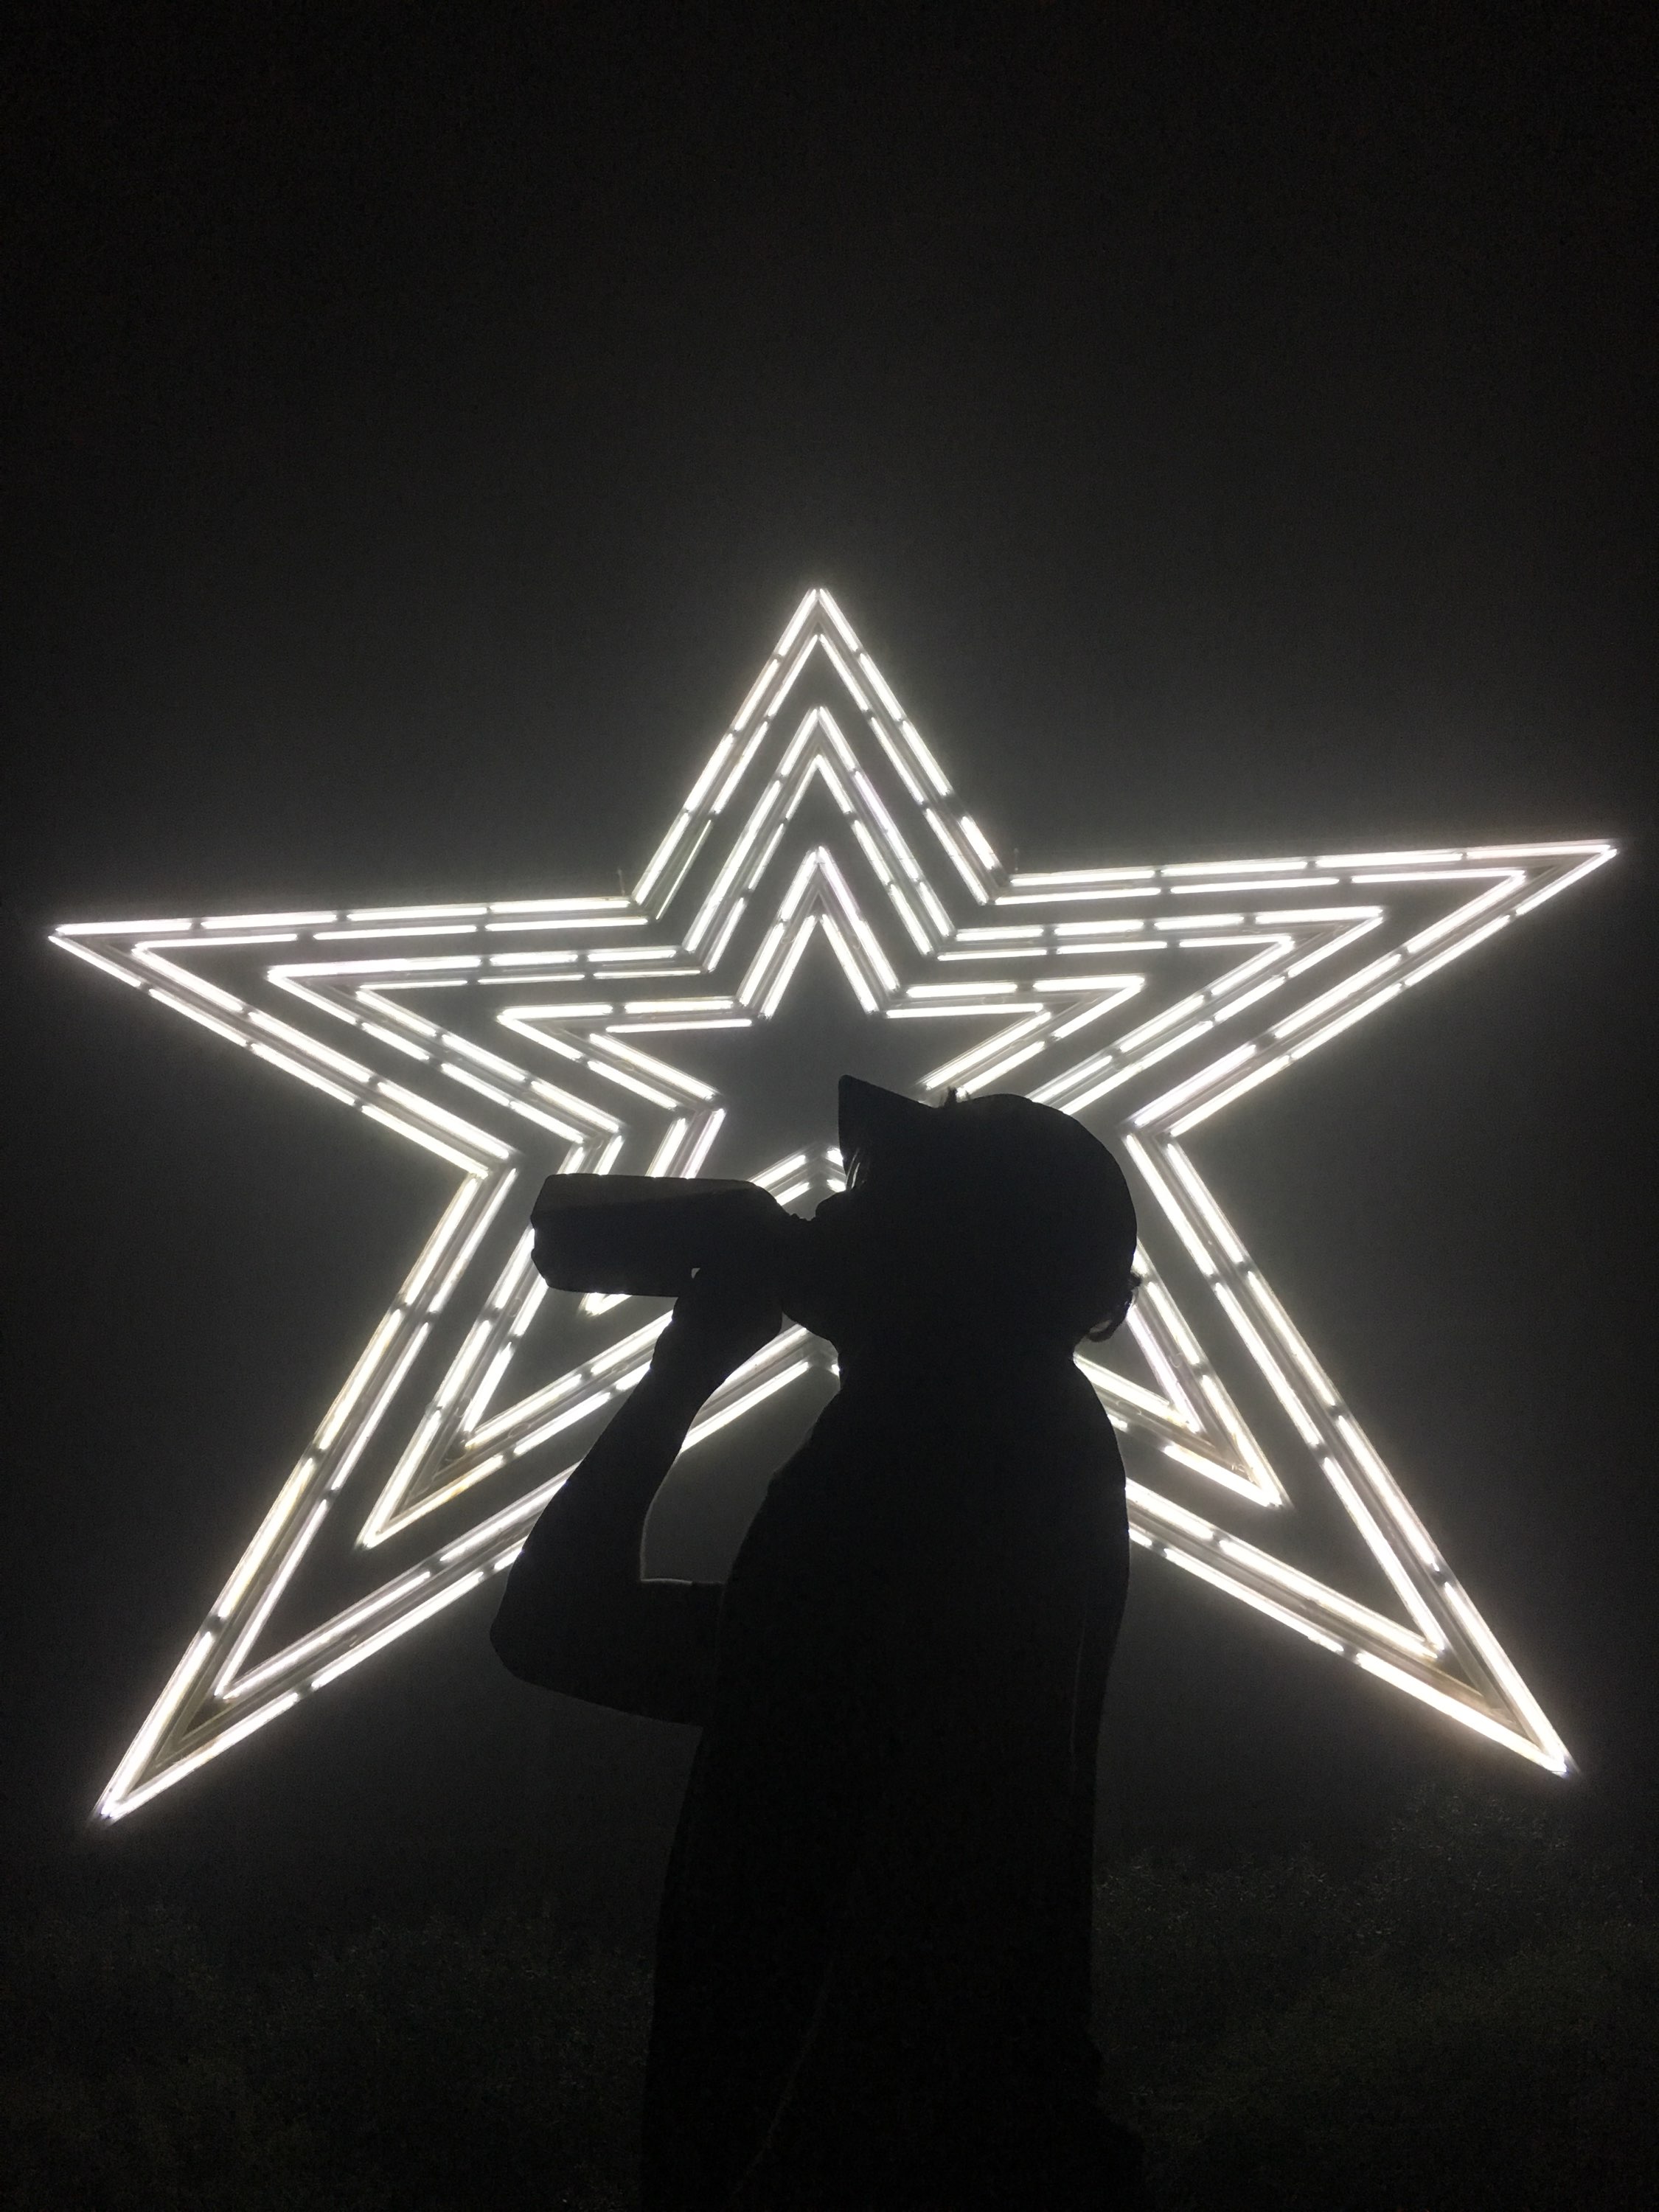 Francesco standing in front of a giant neon star at night